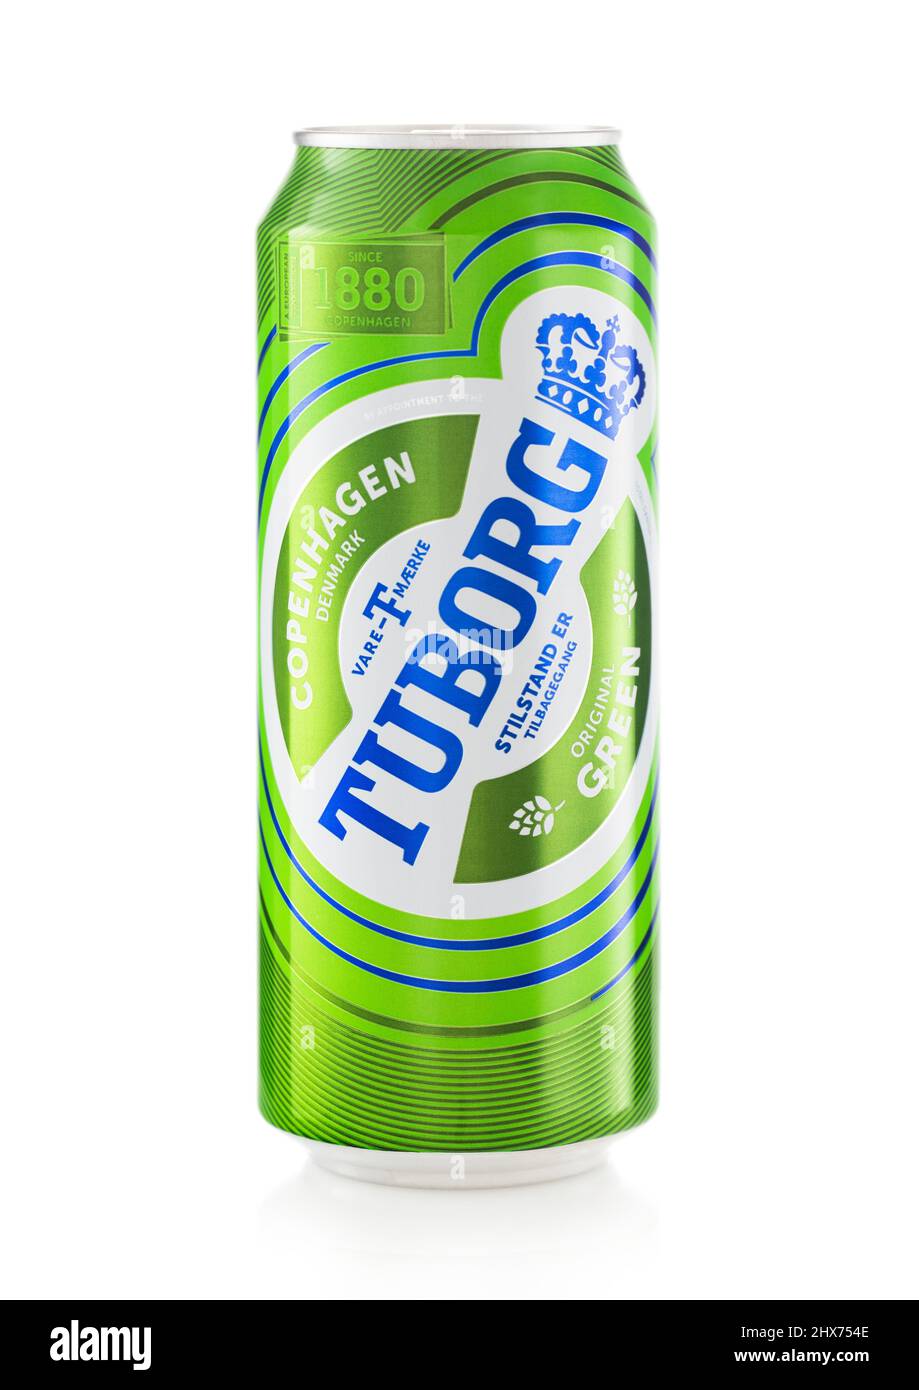 Tuborg Copenhagen High Resolution Stock Photography and Images - Alamy